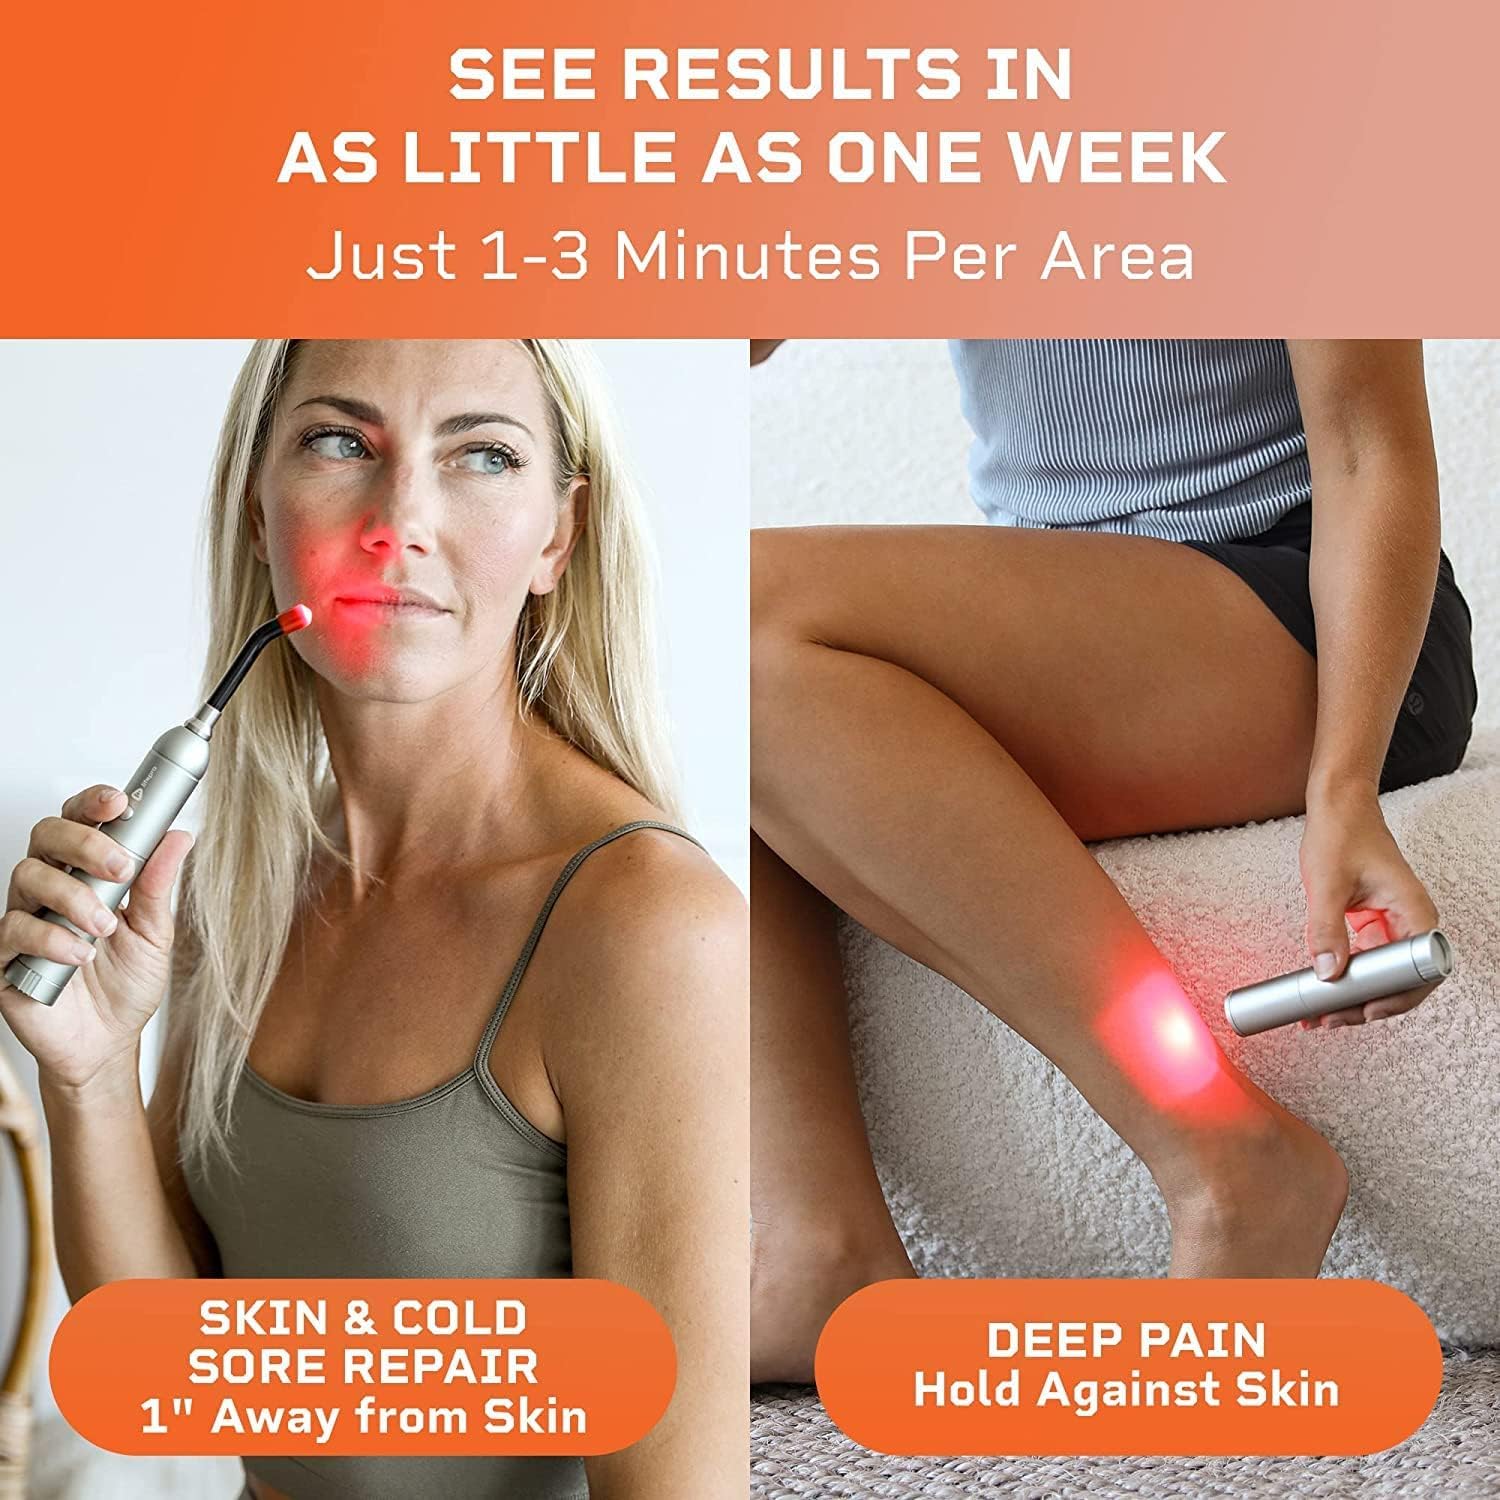 LifePro 2in1 Red Light Therapy, Cold Sore Treatment for Lips, Canker Sore Treatment Inside Mouth, Red Light Therapy Wand, Cold Sore Red Light, Cold Sore Treatment for Patches, Fsa Eligible